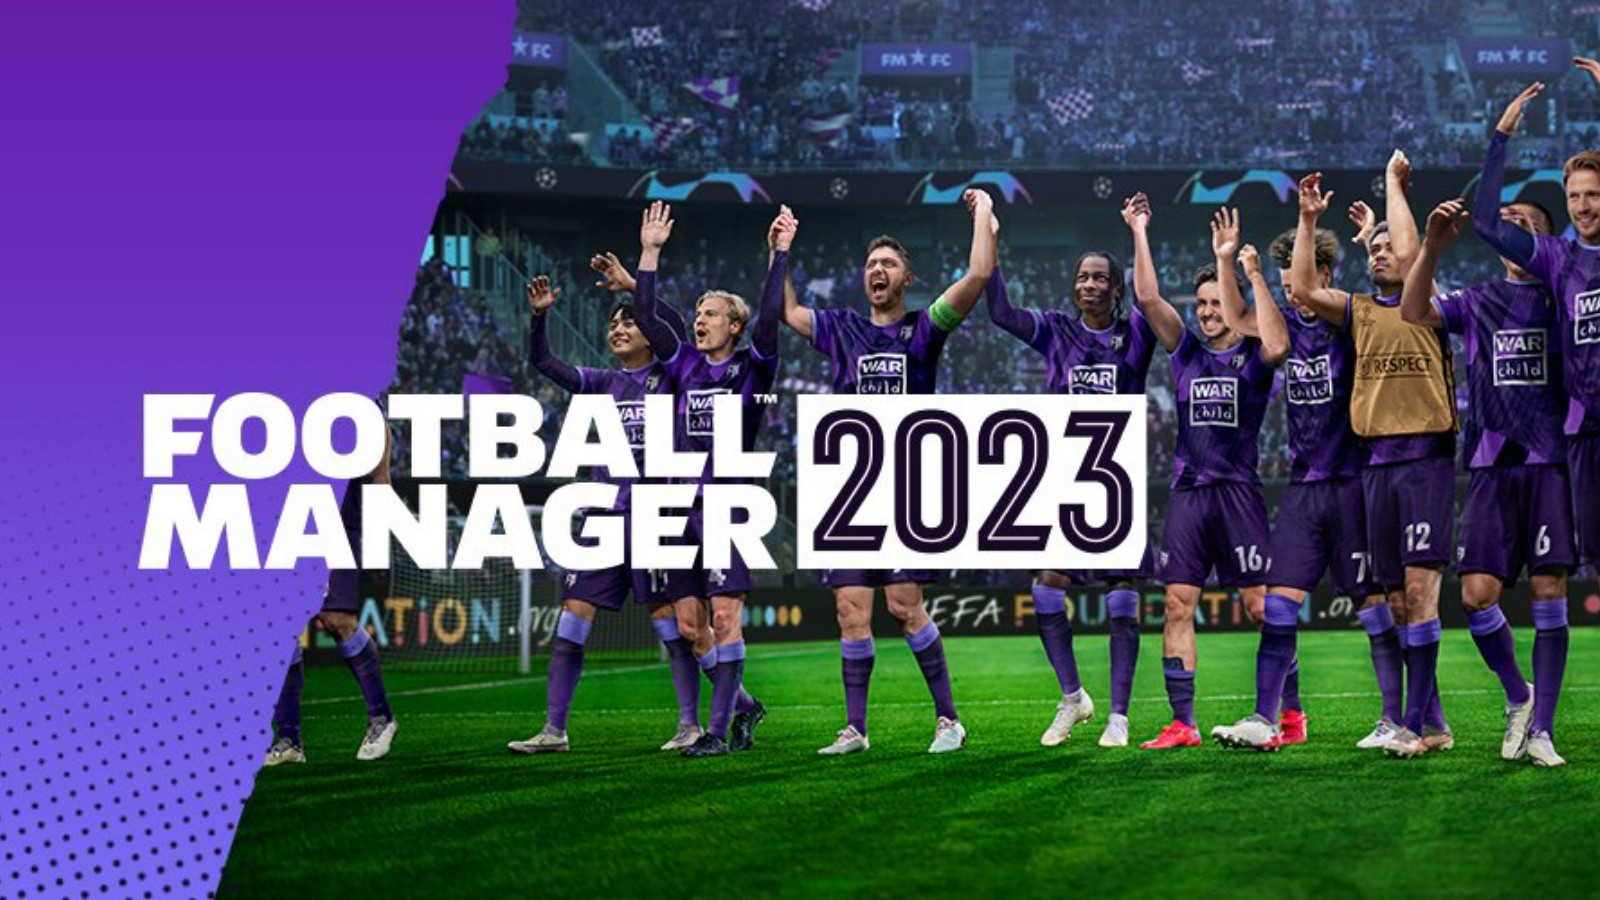 Download Football Manager 2023 Mobile APK 14.4.1 (All) for Android